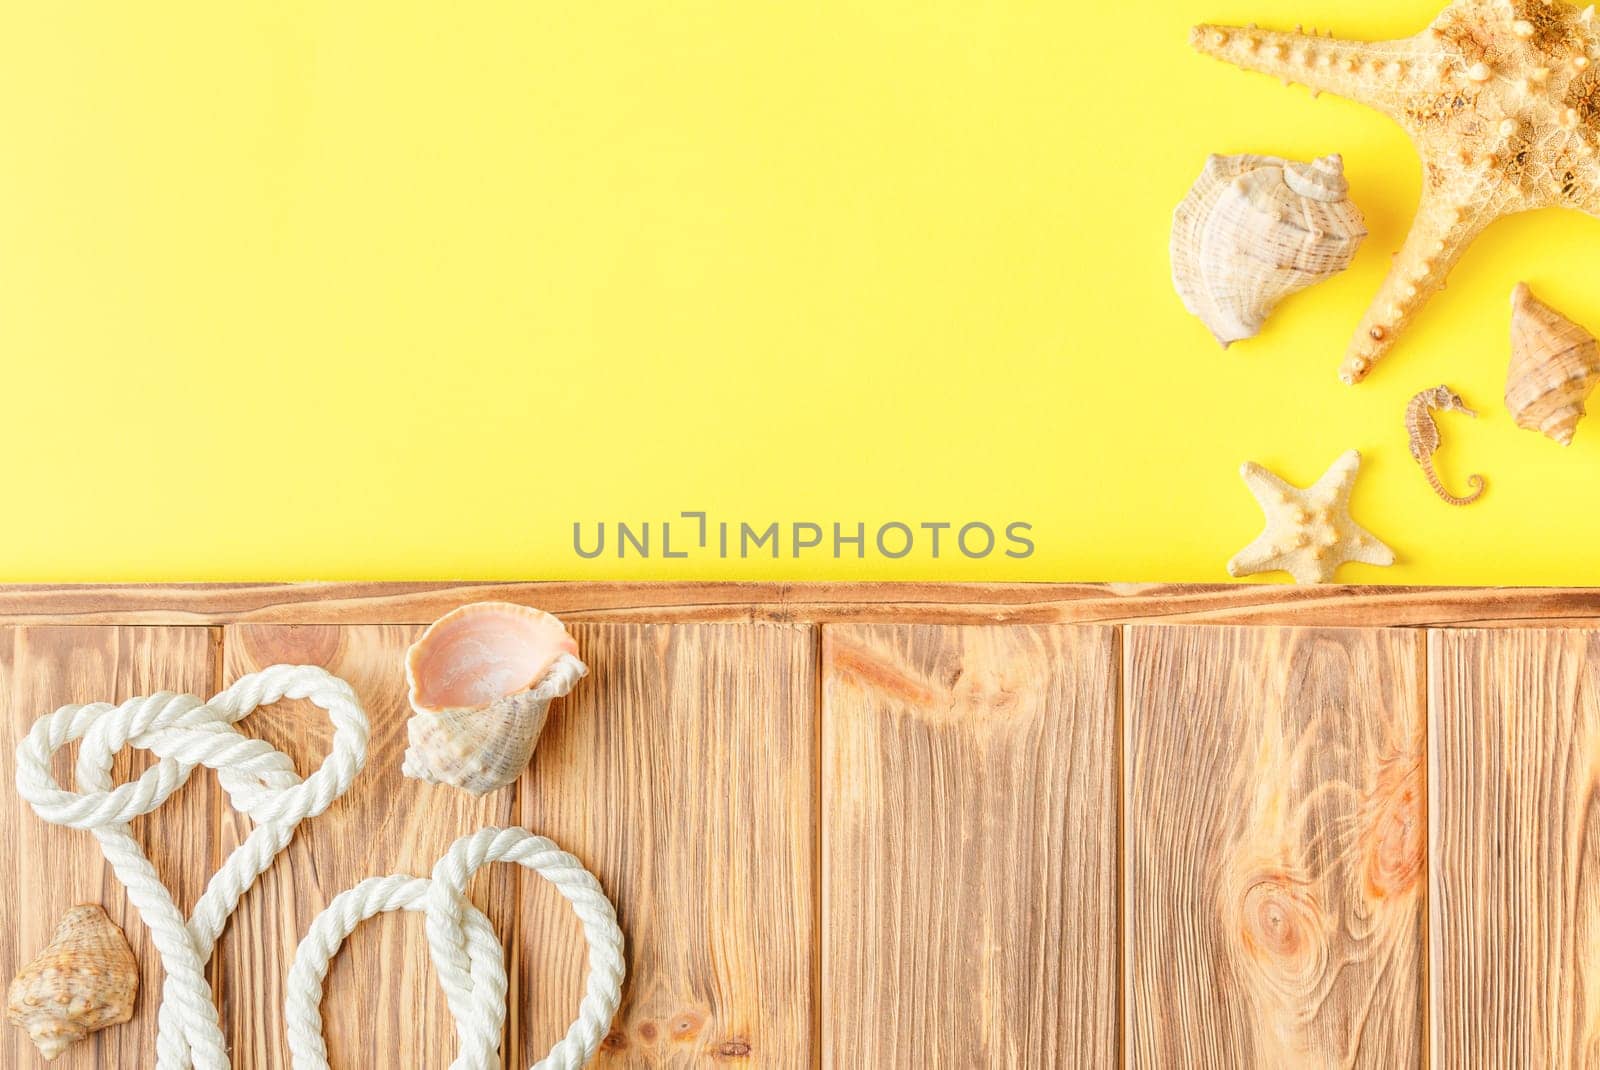 Nautical rope and seashells on wooden background with yellow copy space. Flat lay. Summer vacation concept. Starfish and seahorse. Top view.